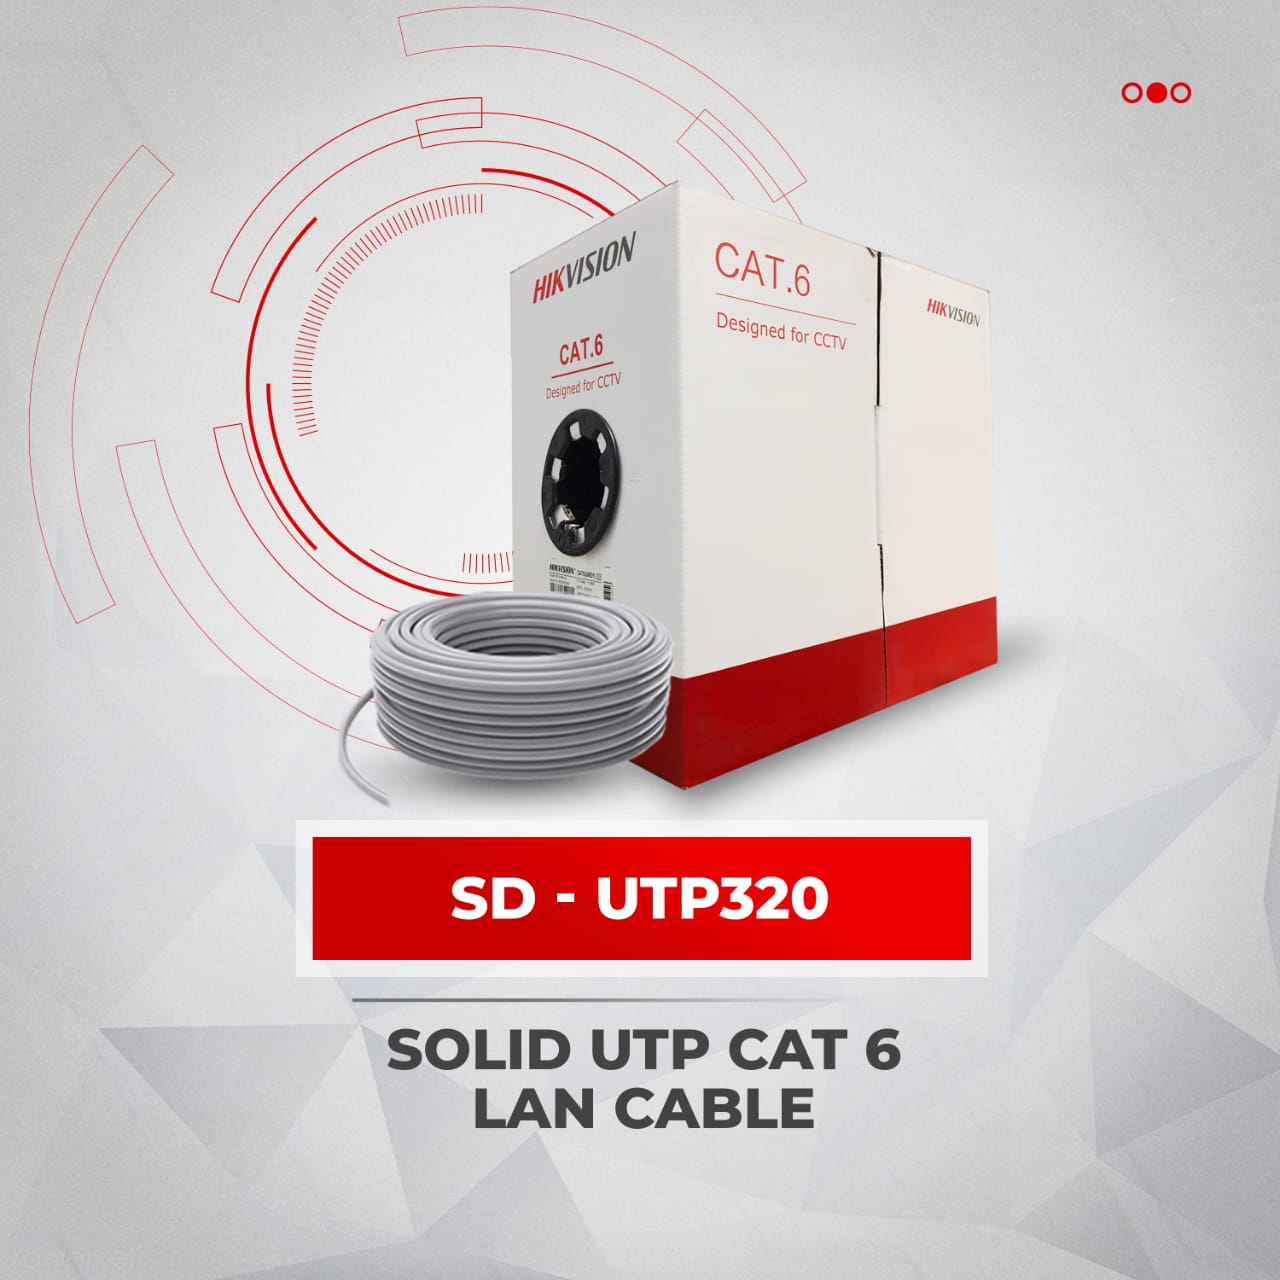 Ds 1 Ln6 Uu Hikvision Cat6 Network Cable Cat 6 Utp (Outdoor)